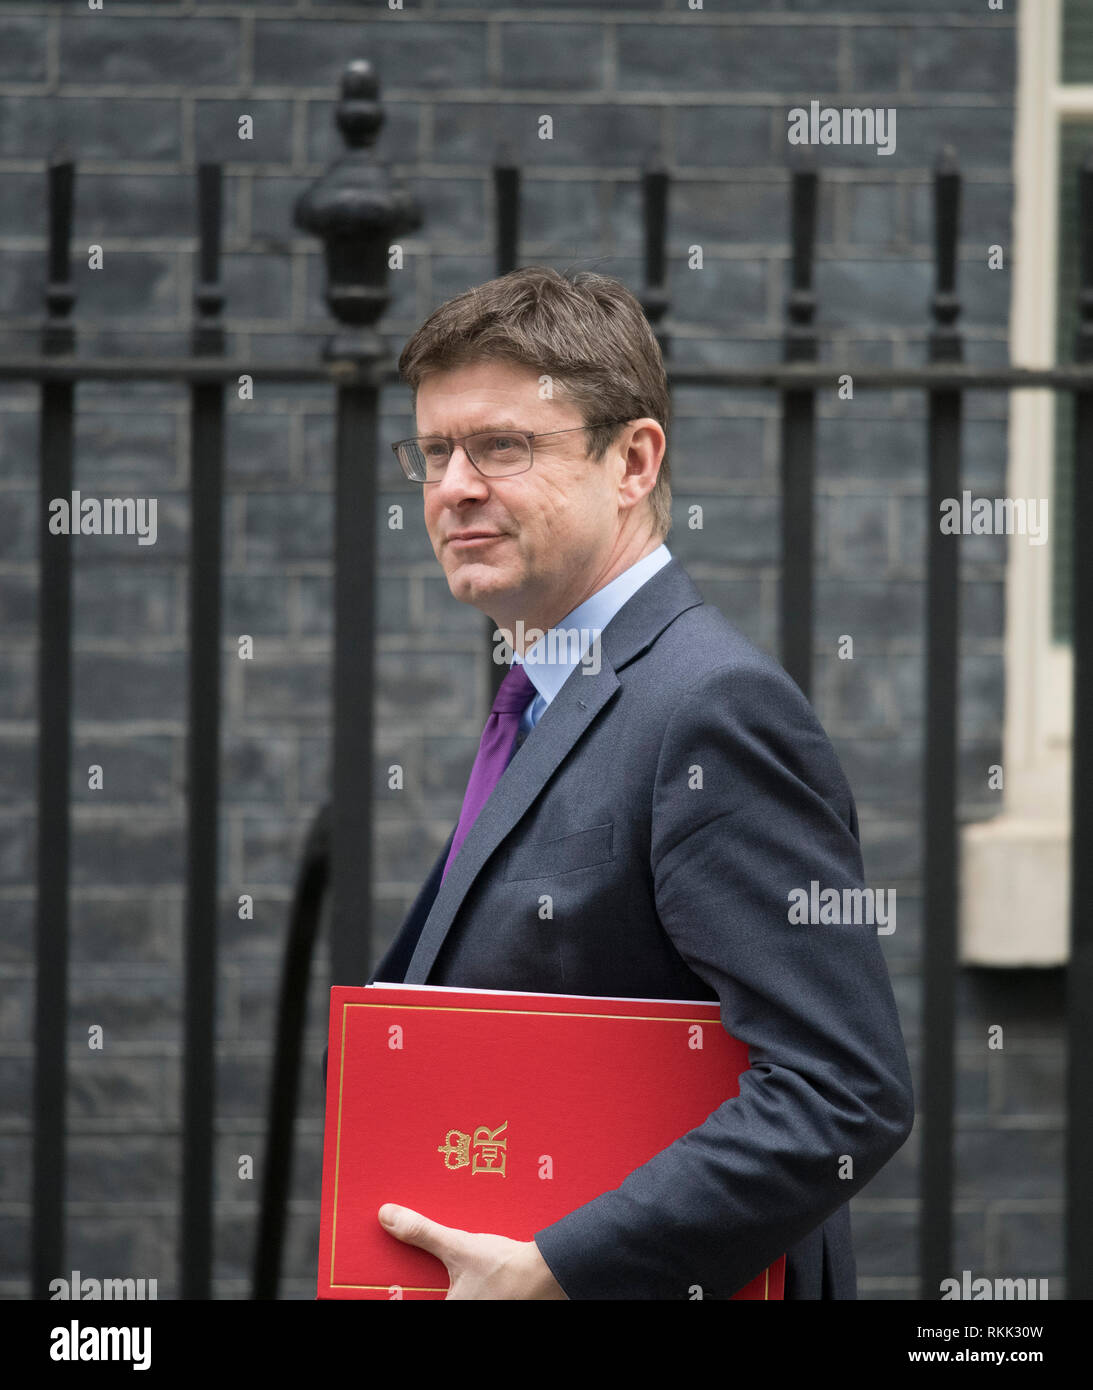 Downing Street, London, UK. 12 February 2019. Government Ministers arrive in Downing Street for weekly cabinet meeting. Greg Clark, Business and Energy Secretary. Credit: Malcolm Park/Alamy Live News. Stock Photo